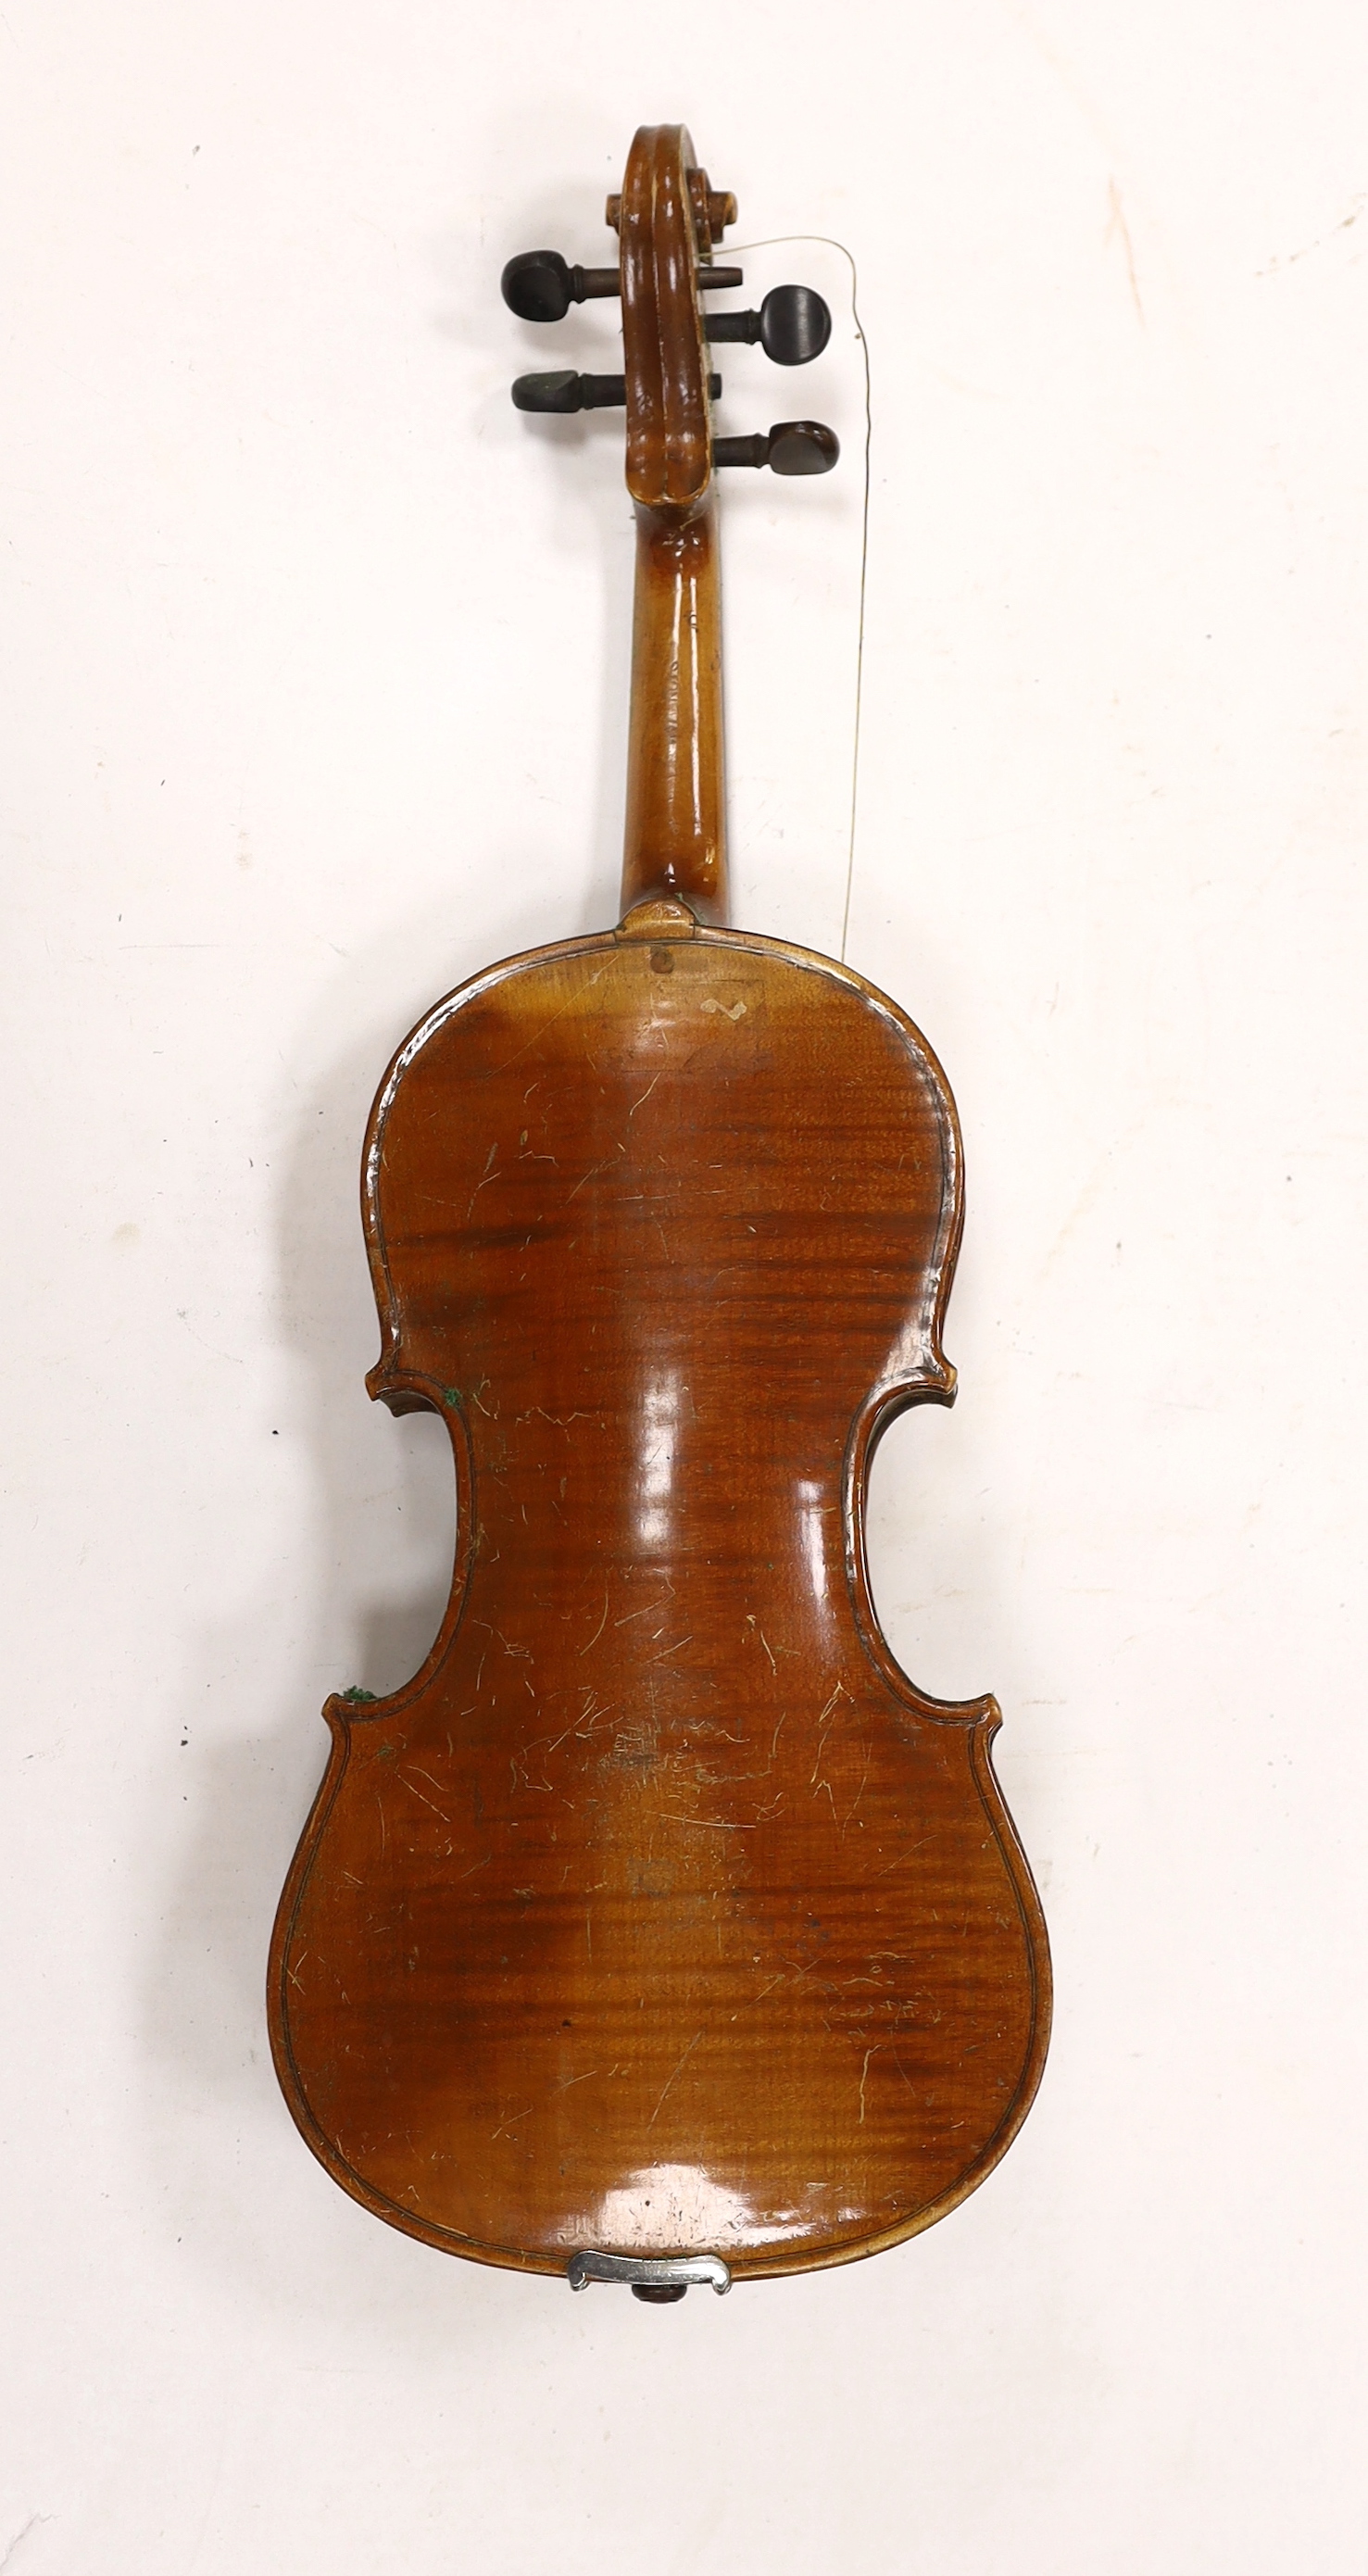 Two late 19th/early 20th cased century violins